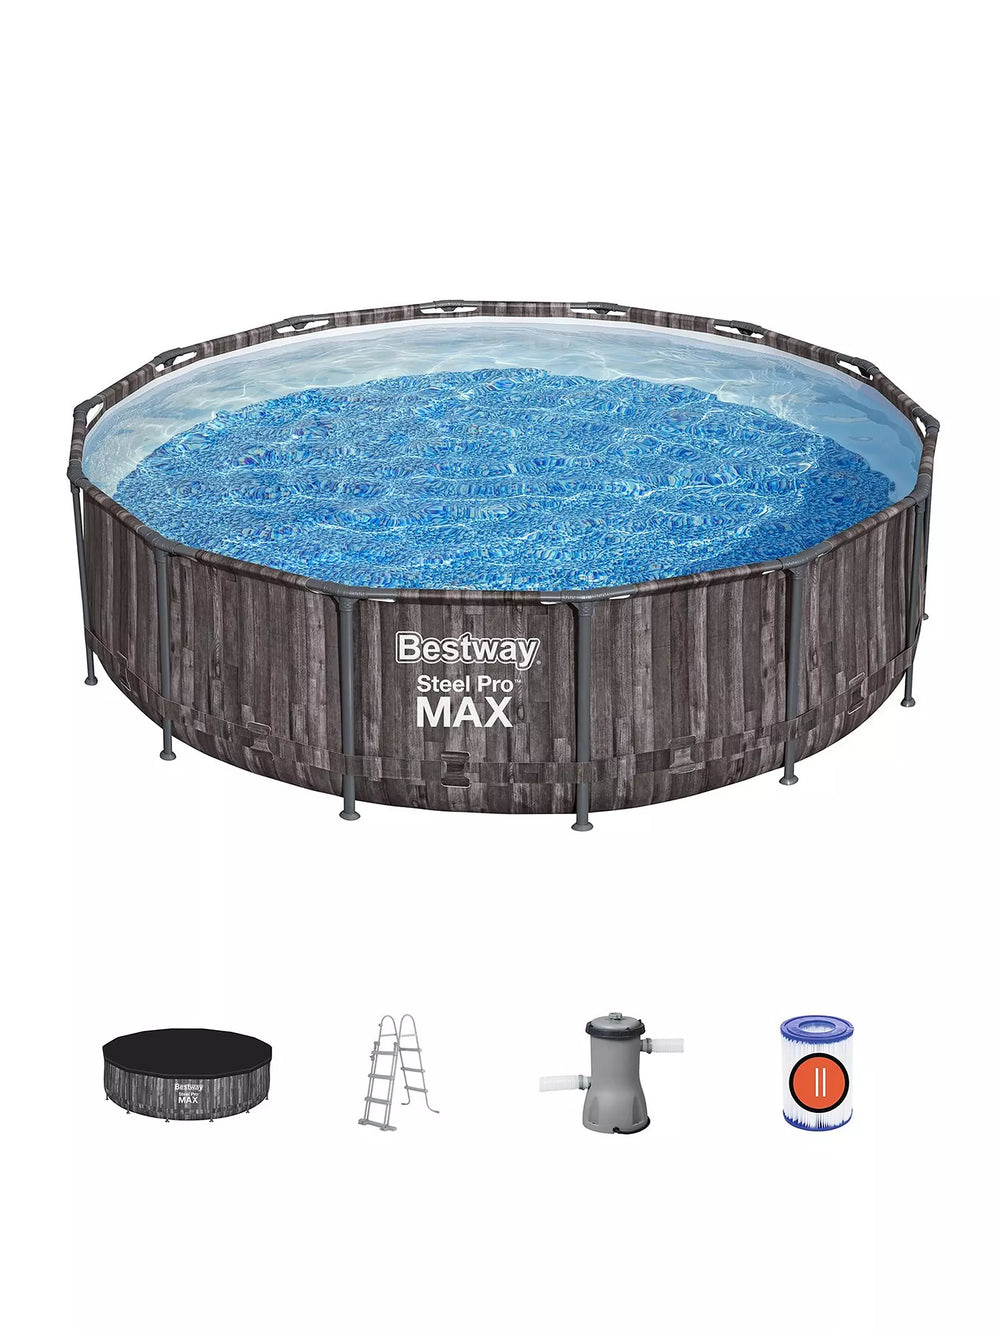 Bestway 14ft Steel Pro MAX Frame Stone Pool, Filter Pump with Ladder